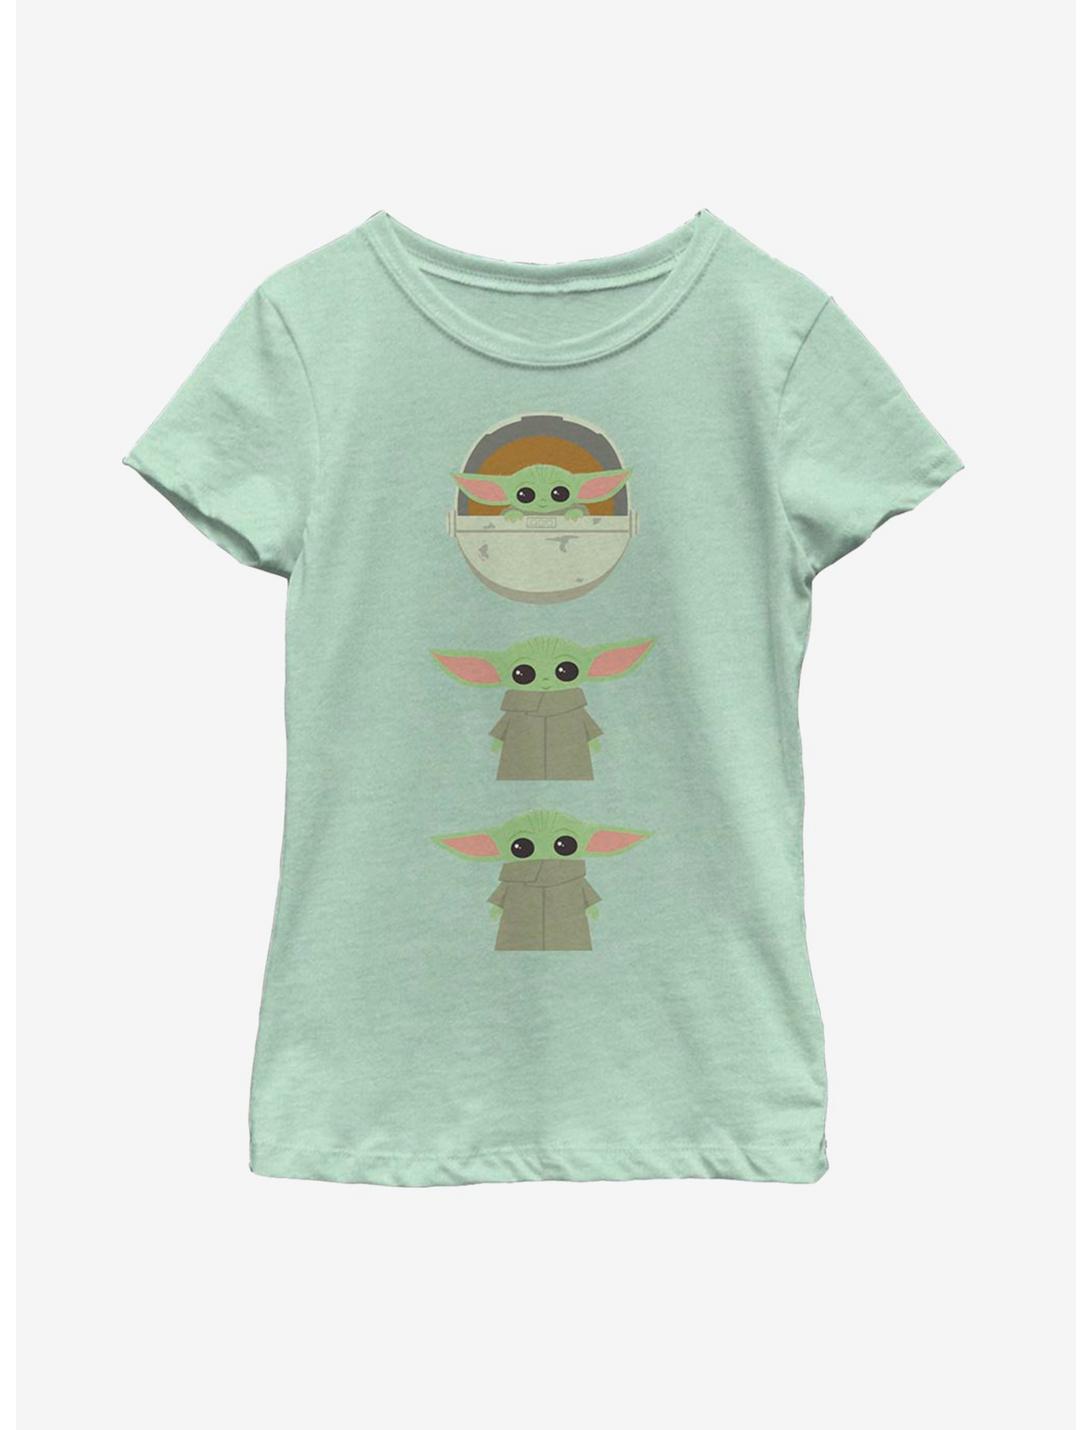 Star Wars The Mandalorian The Child Stack Youth Girls T-Shirt, MINT, hi-res